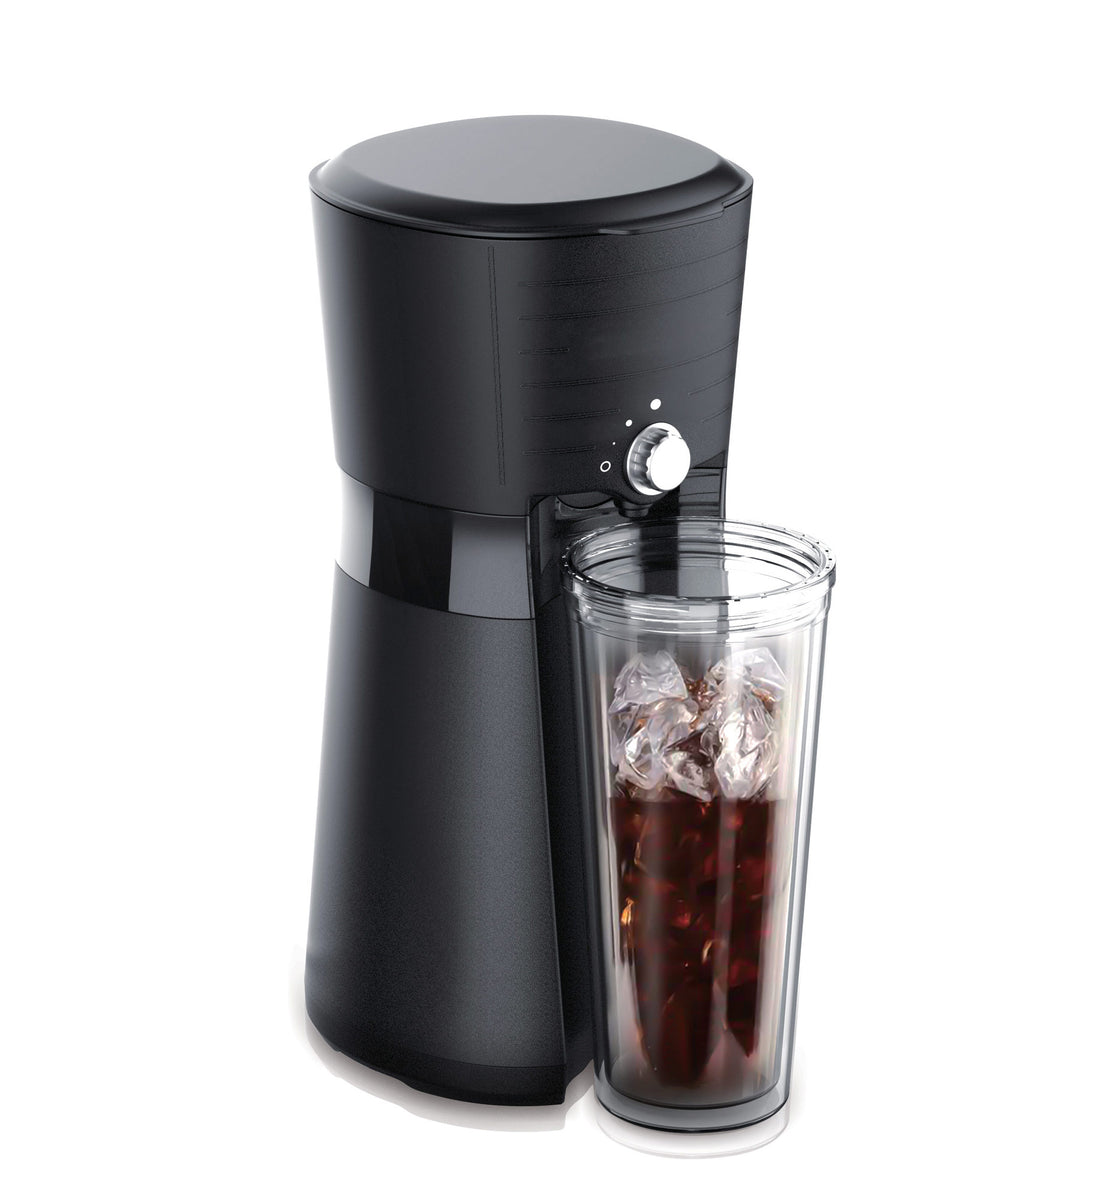 Iced Coffee Maker with 650ml reusable cup full of ice cubes and coffee.